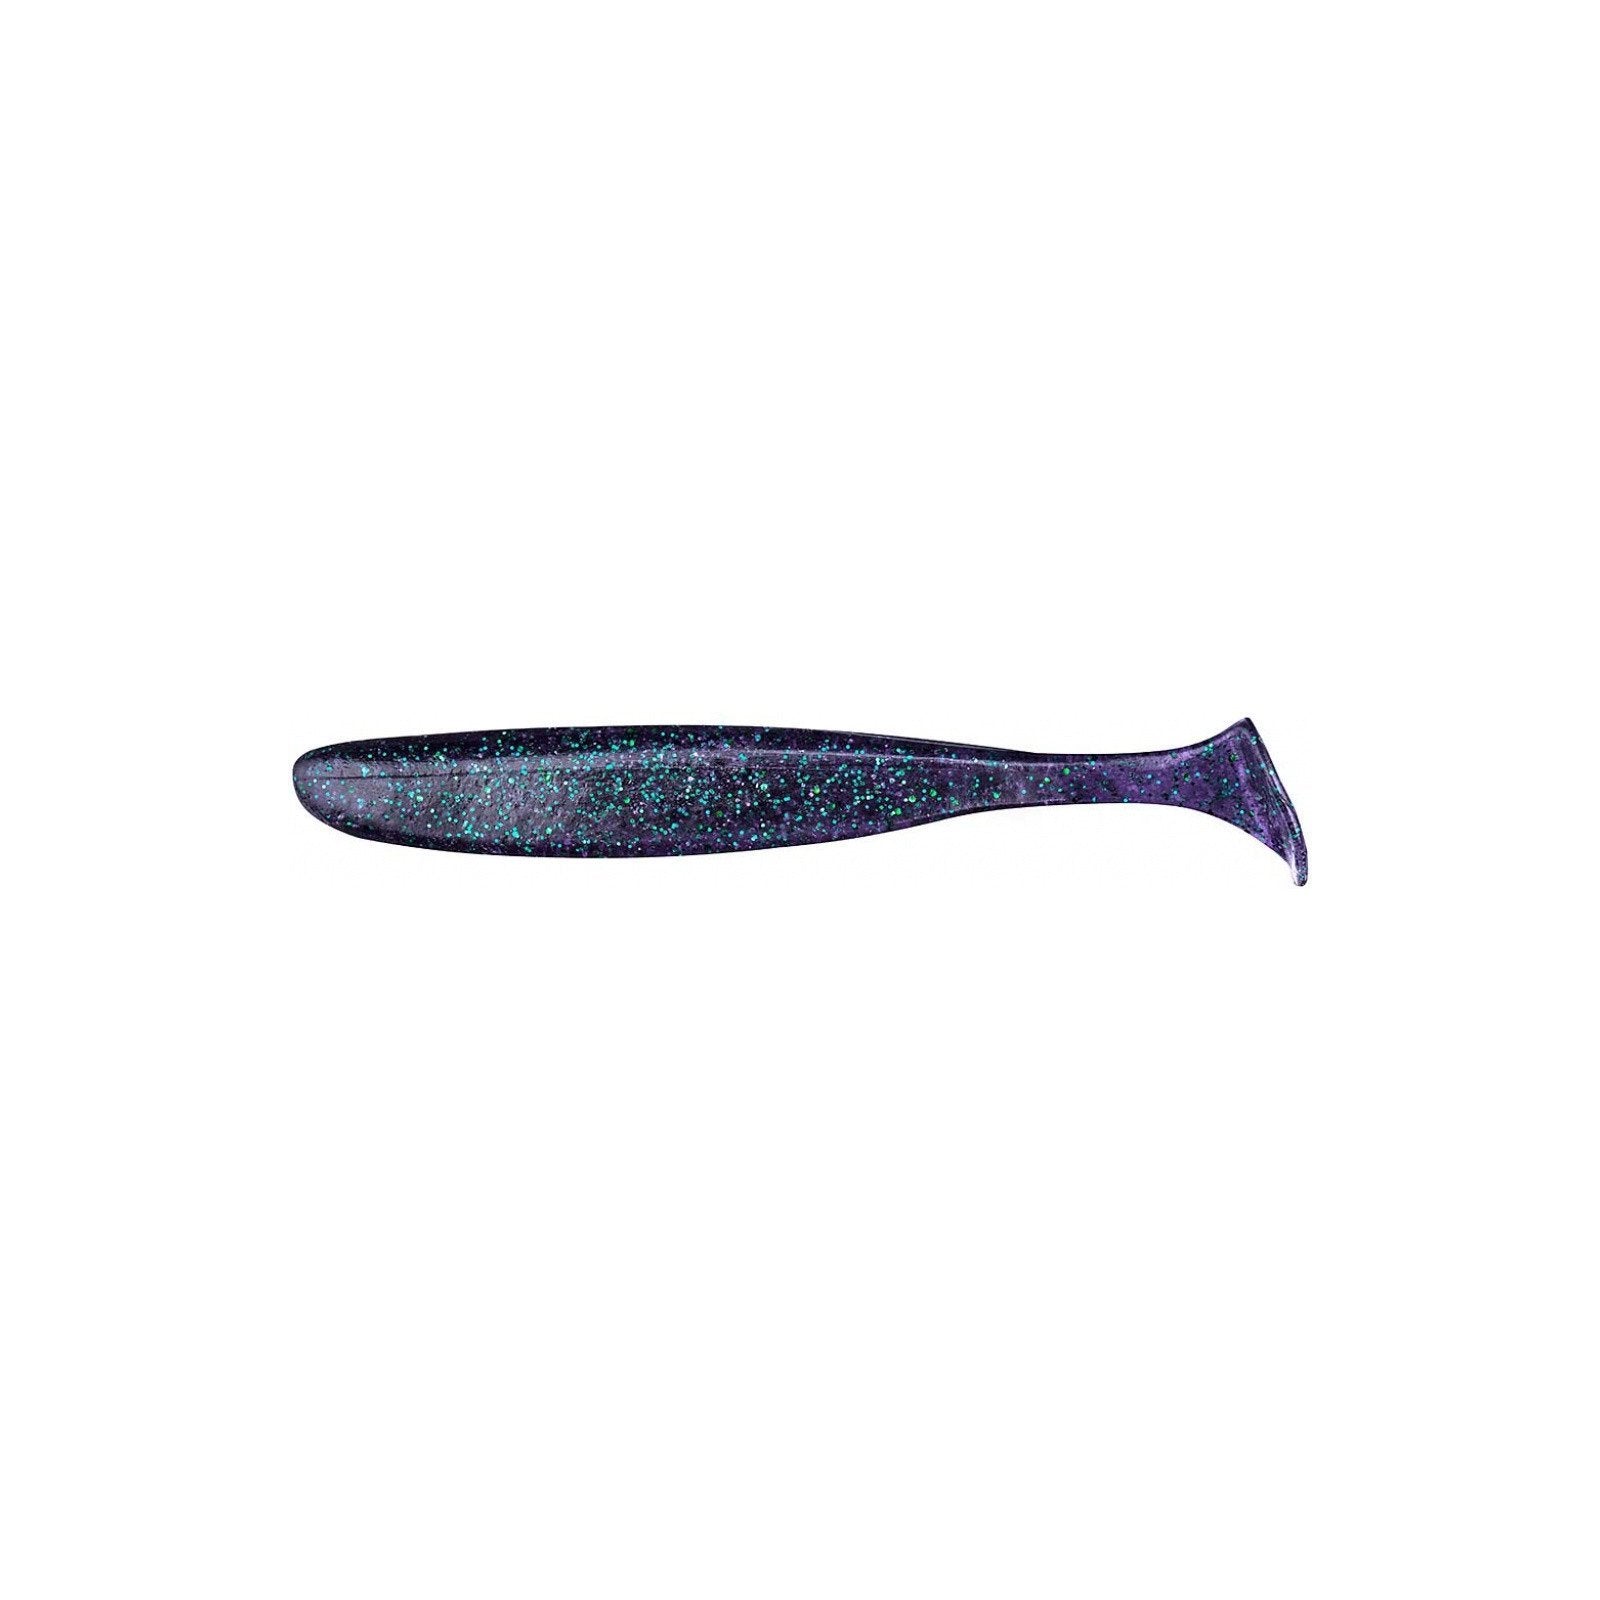 Select Fishing Easy Shad Gummifisch 777